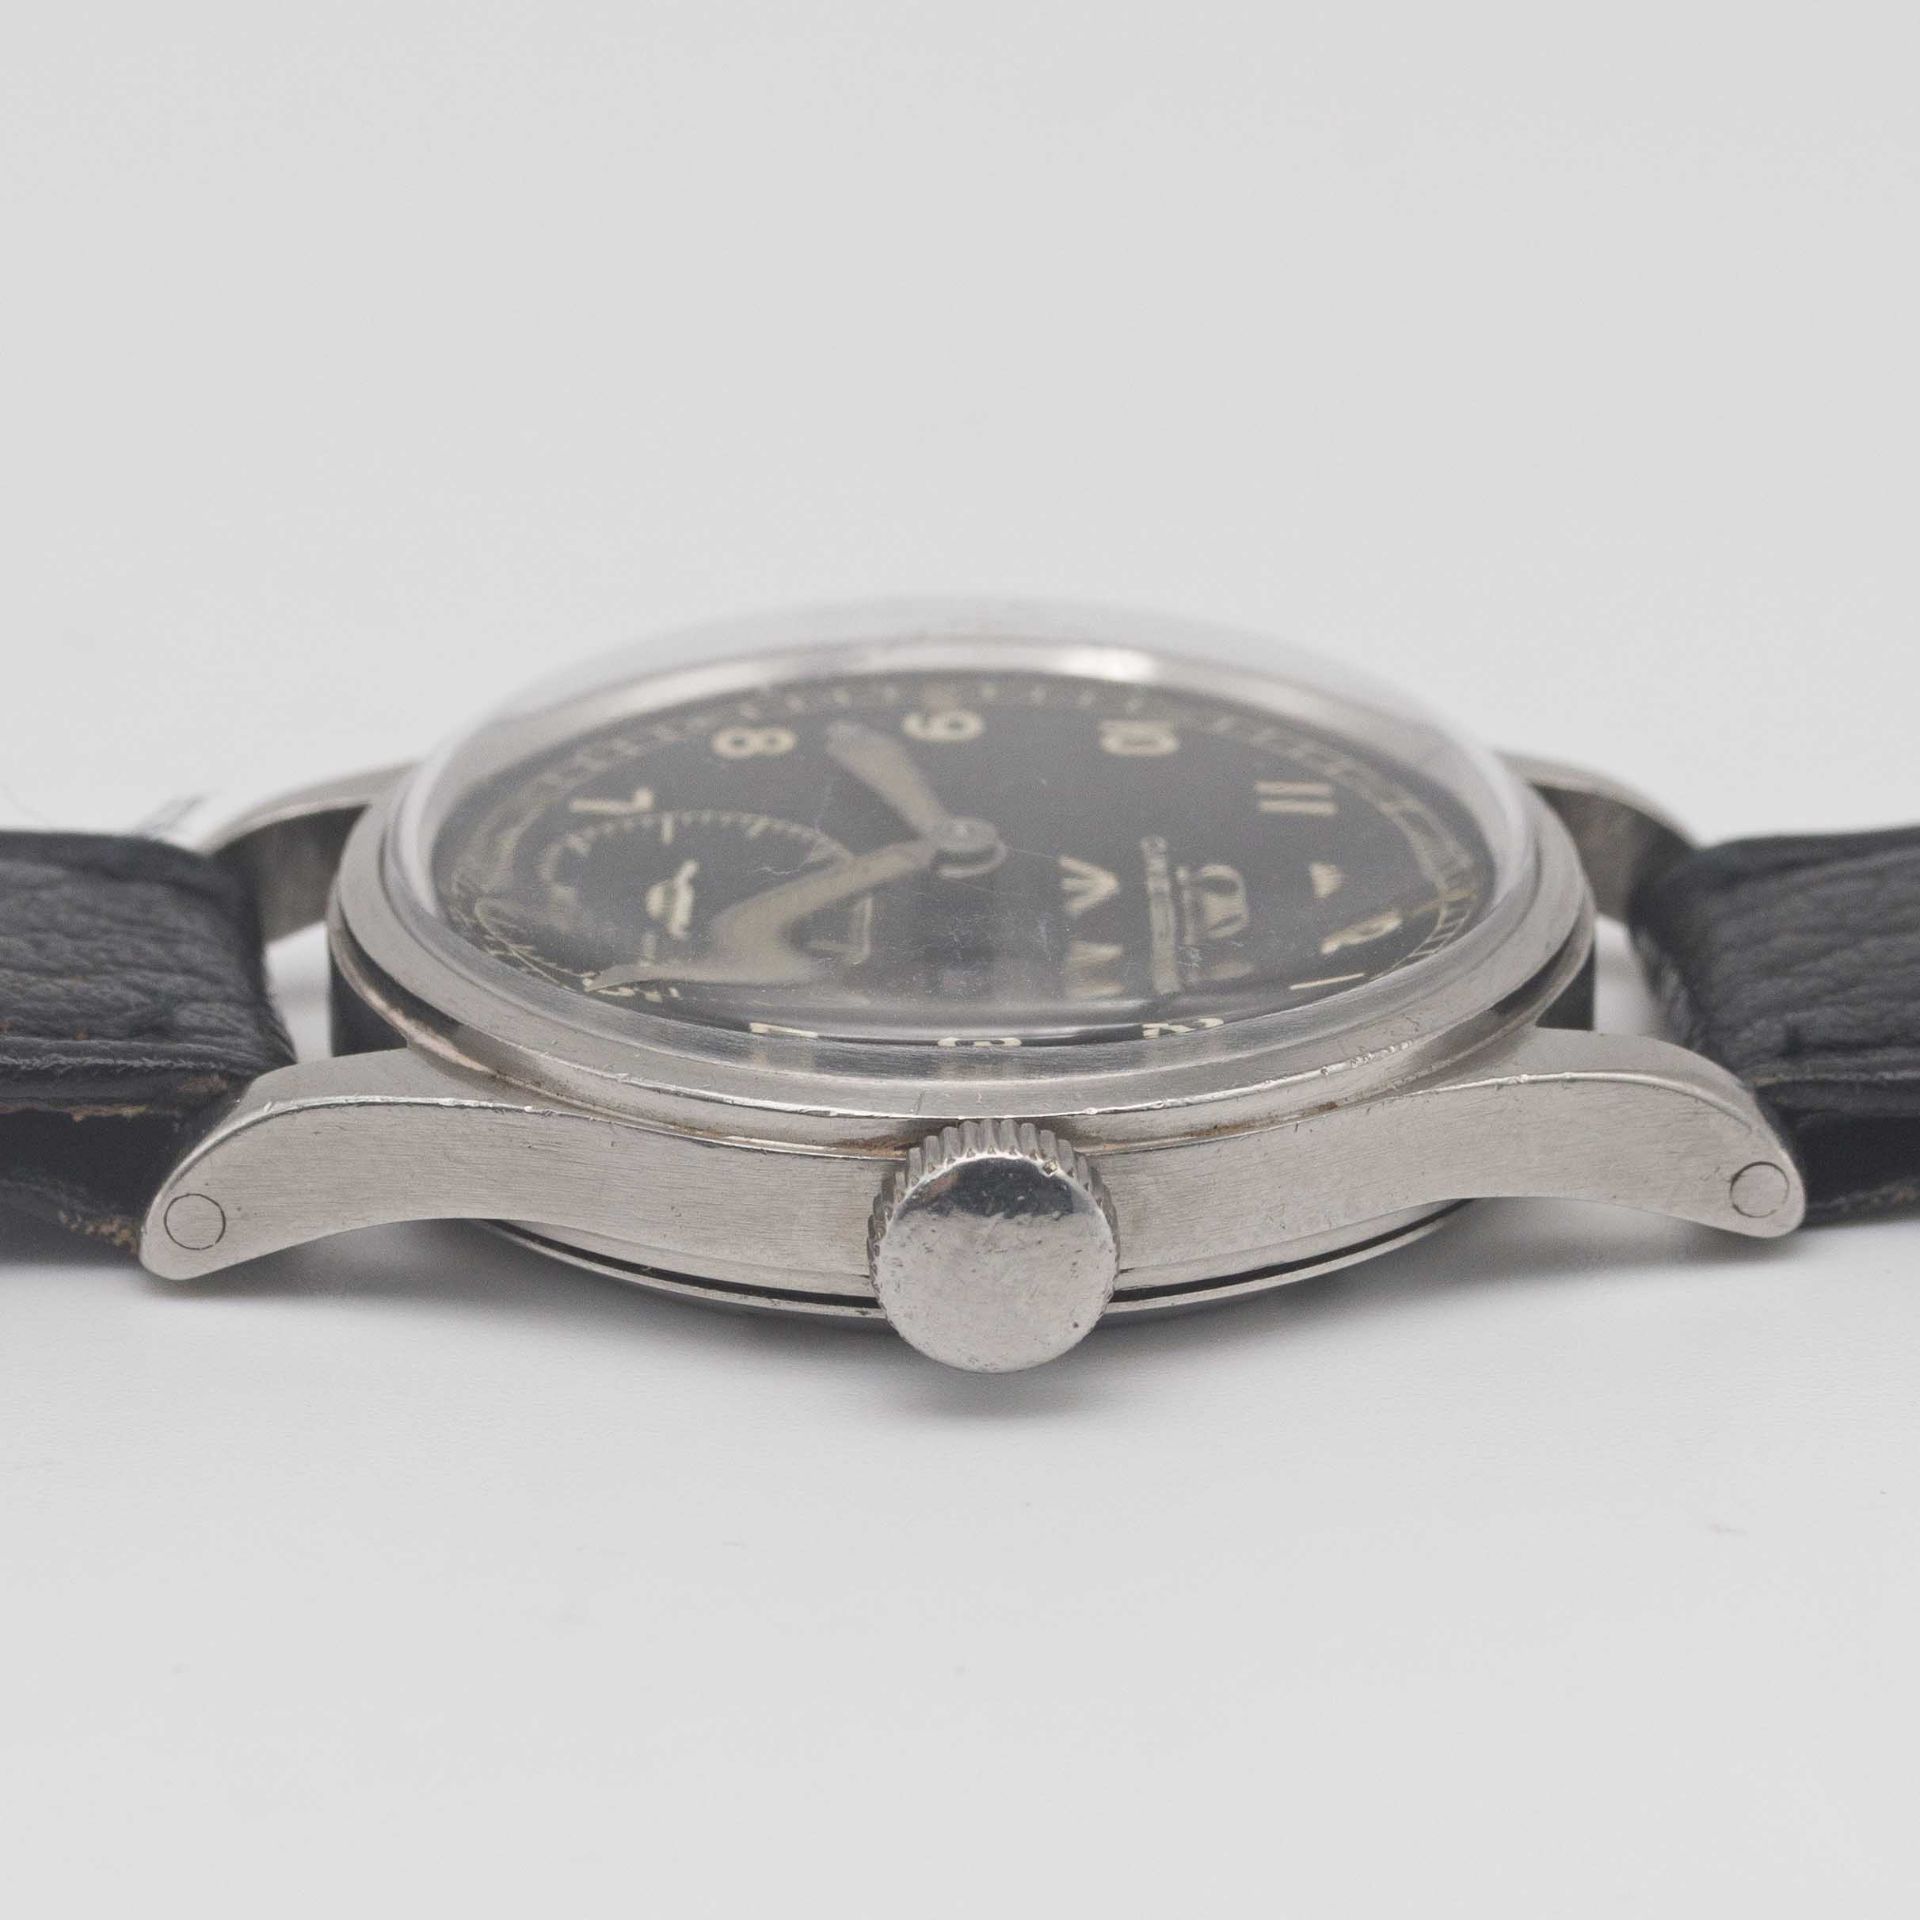 A GENTLEMAN'S STAINLESS STEEL BRITISH MILITARY OMEGA W.W.W. WRIST WATCH CIRCA 1945, PART OF THE " - Image 8 of 9